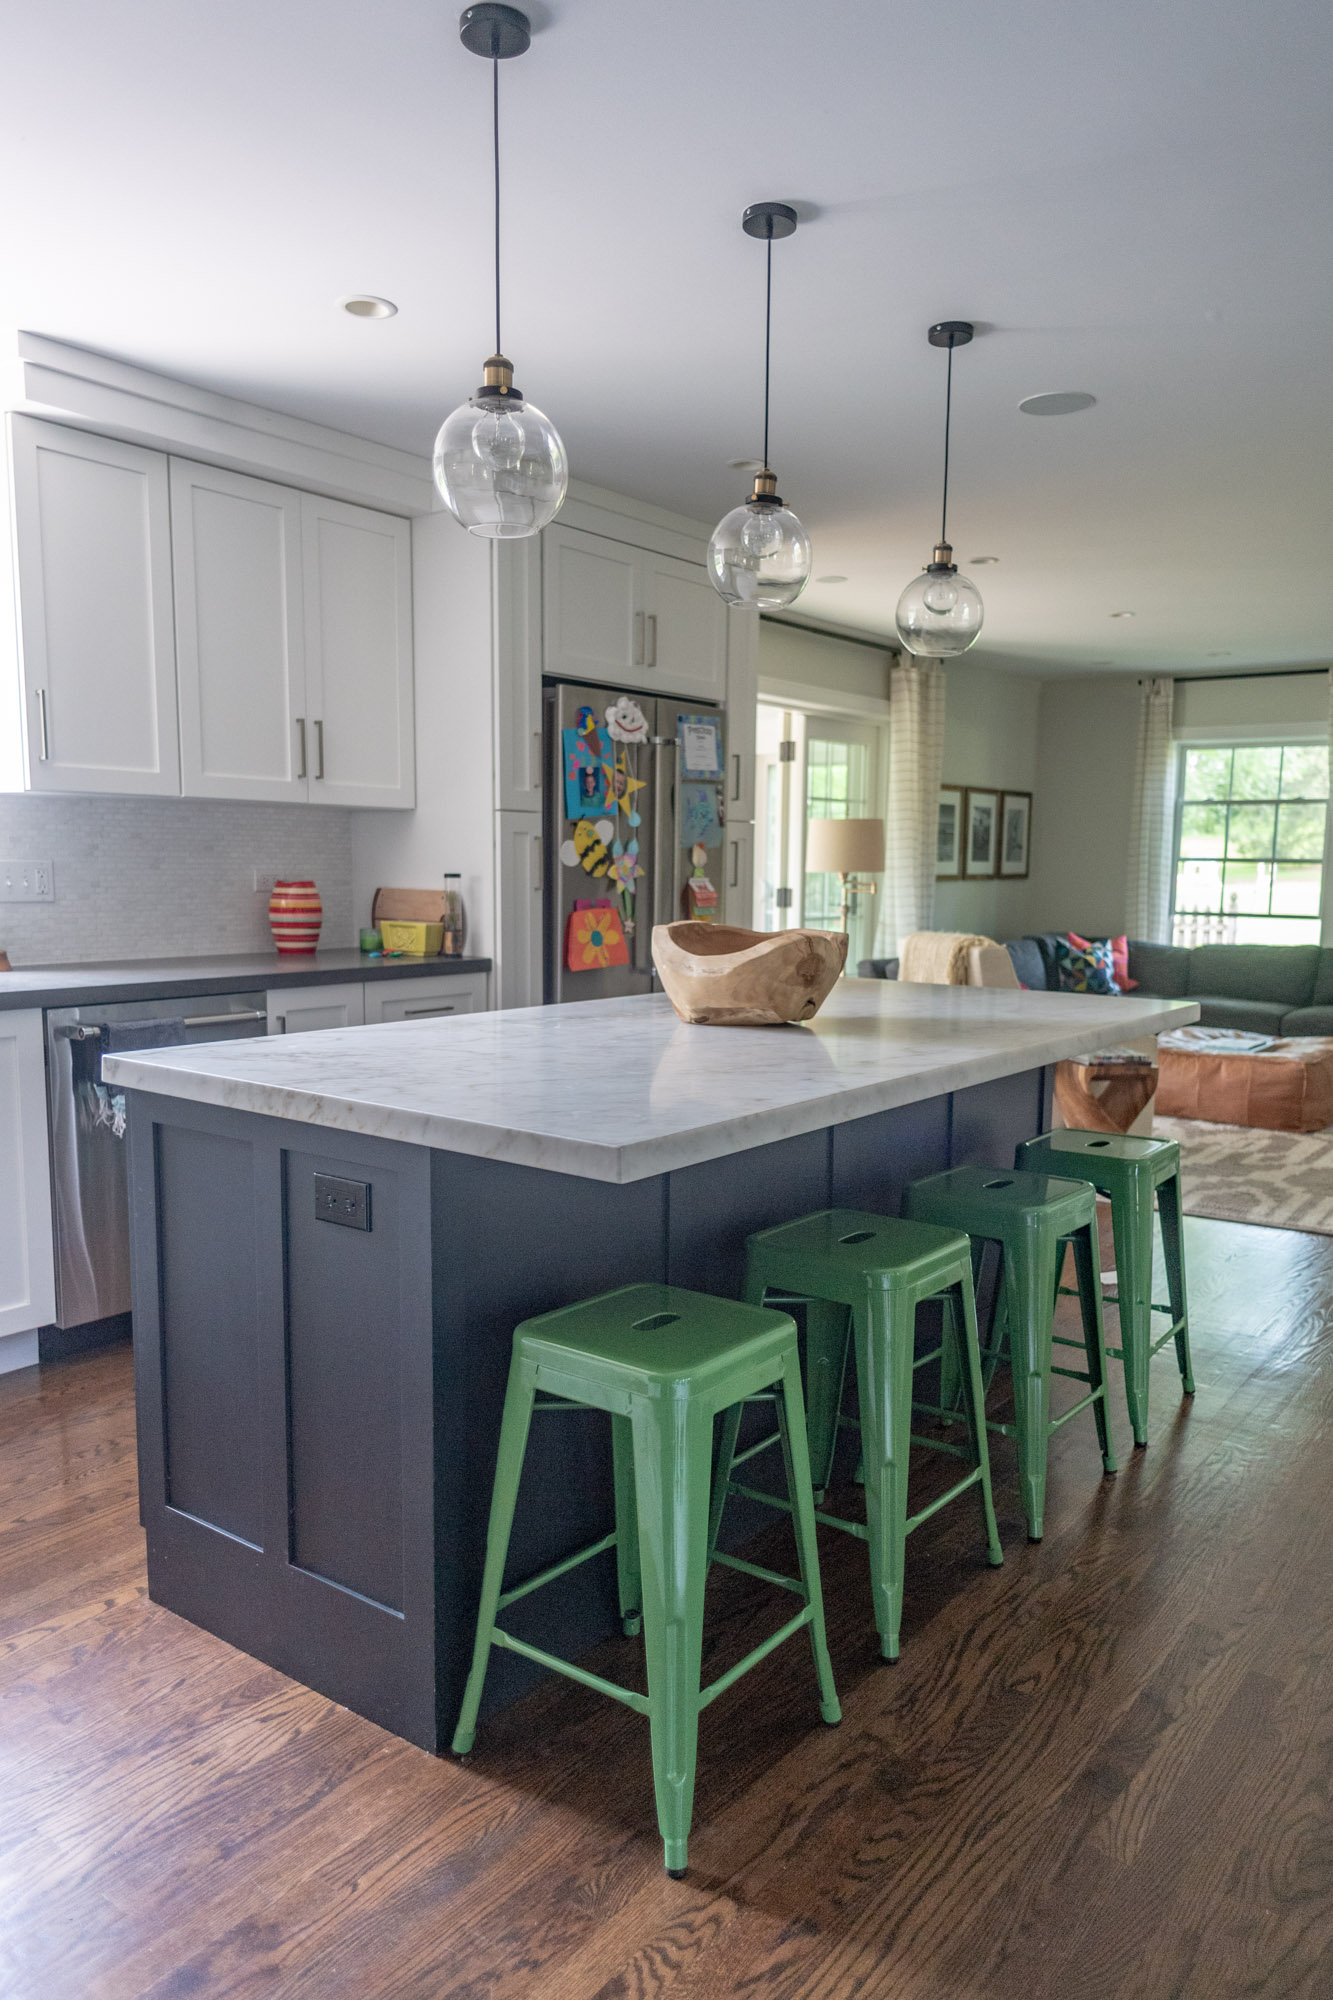 MMDH: Design Tips for Counter Stools